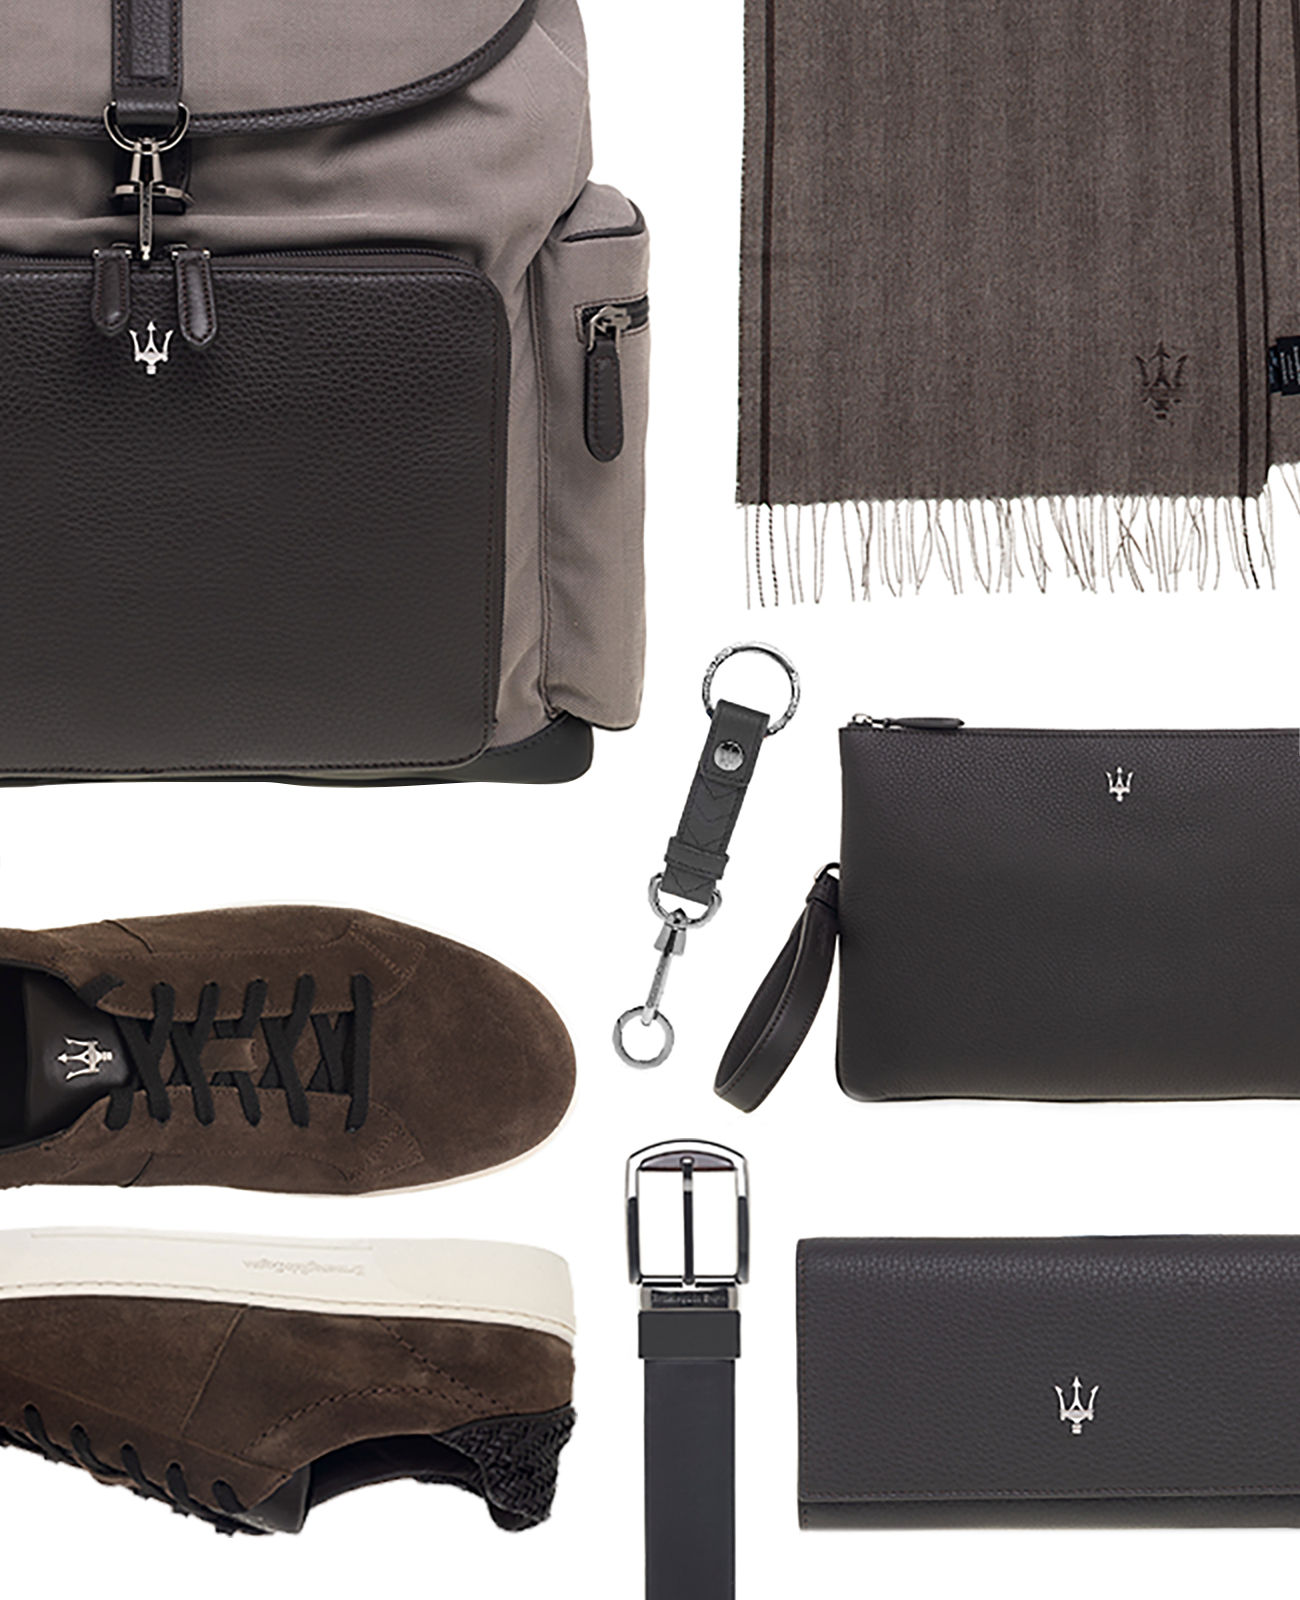 Zegna Collection of shoes & accessories